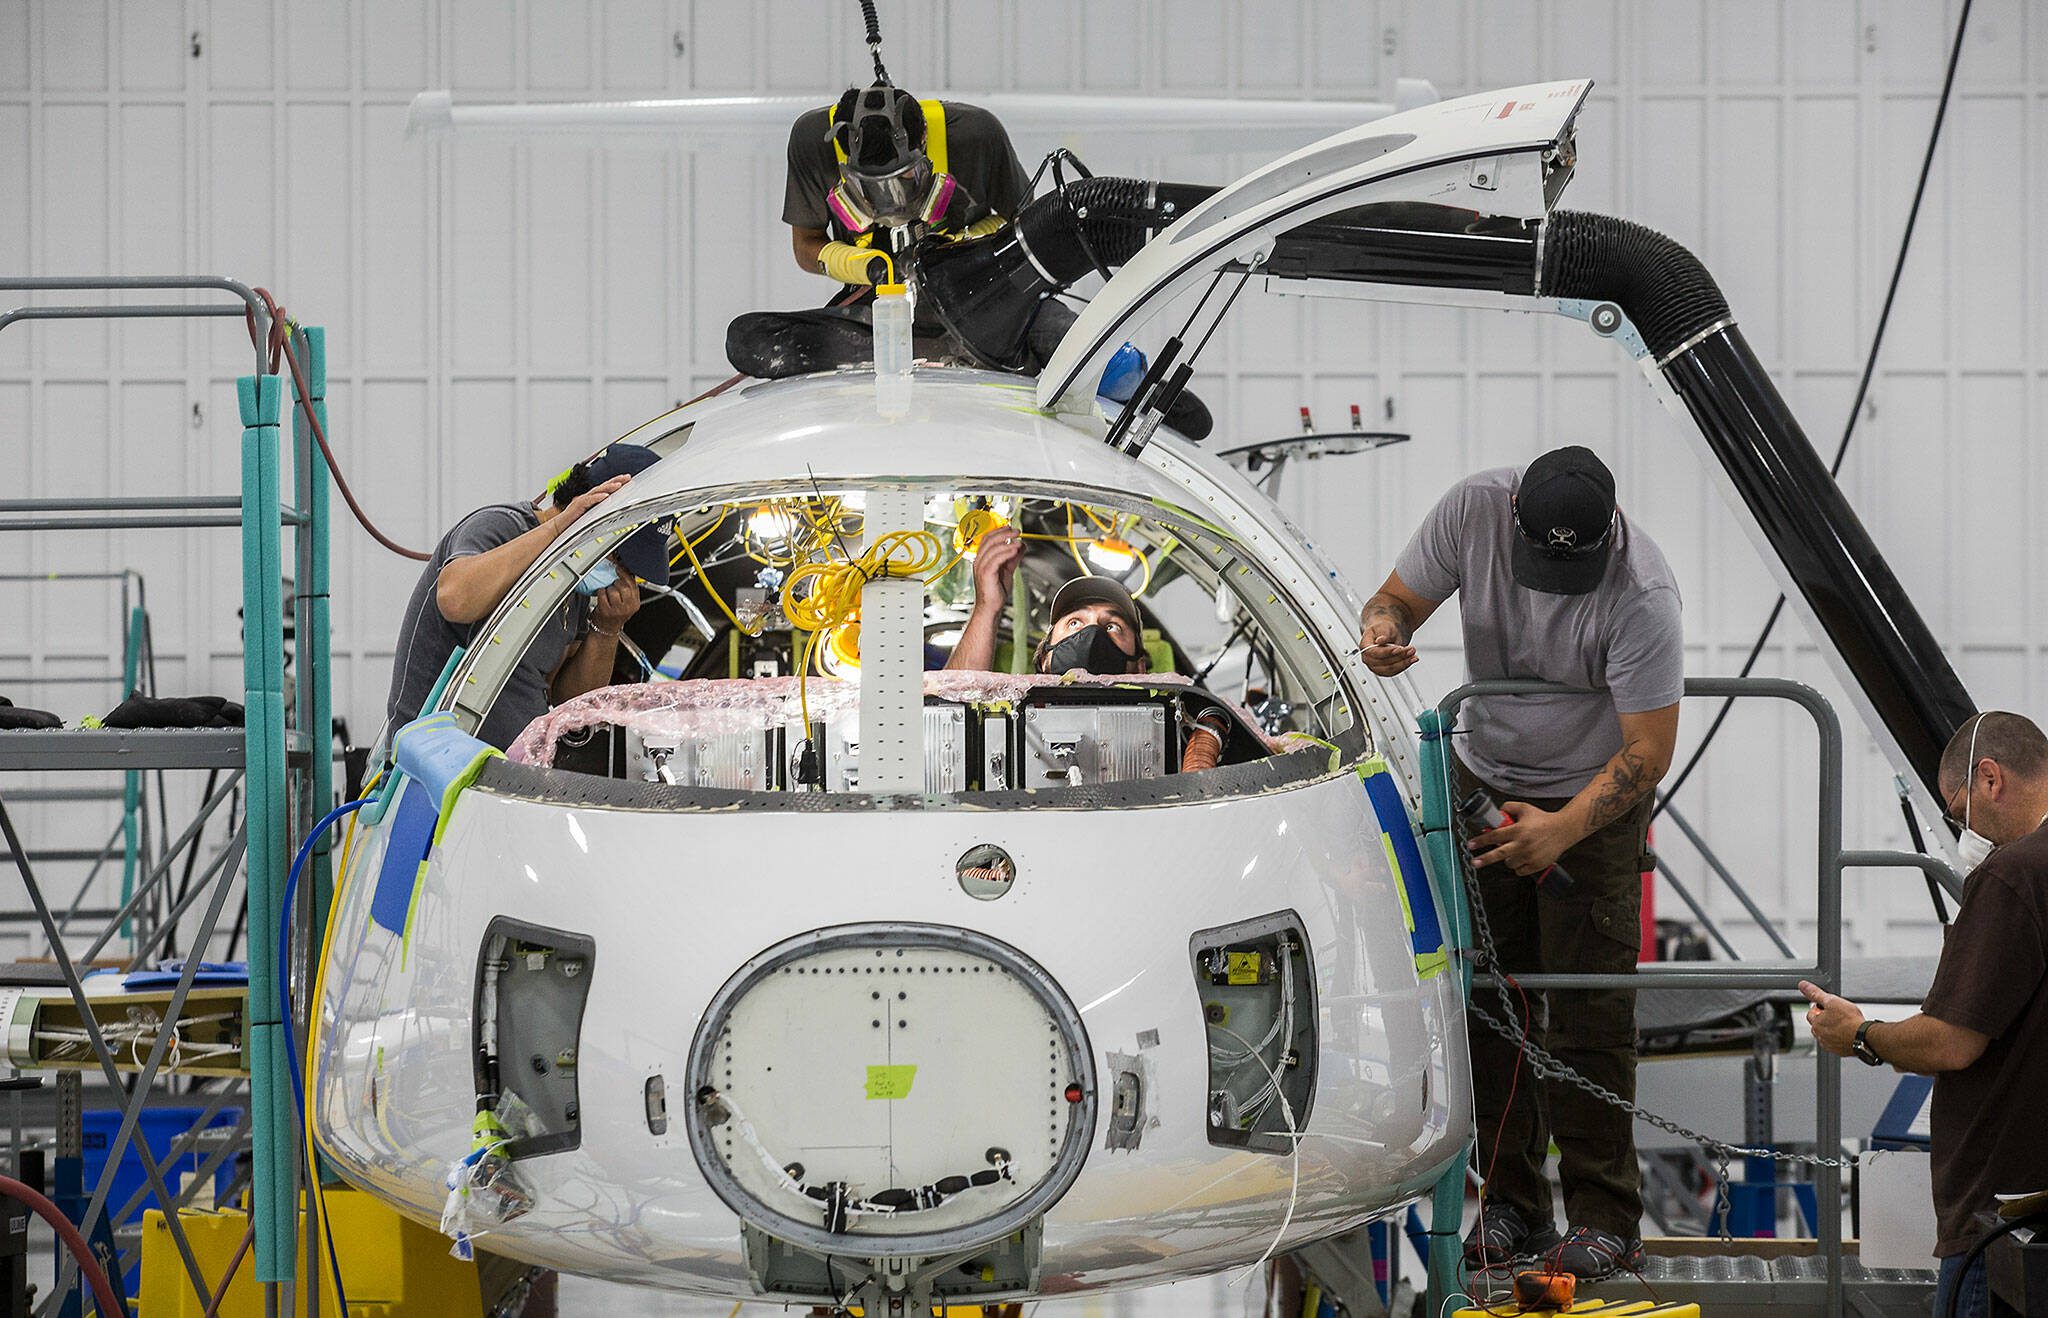 Workers build the first all-electric commuter plane, the Eviation Alice, at Eviation’s plant on Wednesday, Sept. 8, 2021 in Arlington, Washington. (Andy Bronson / The Herald)